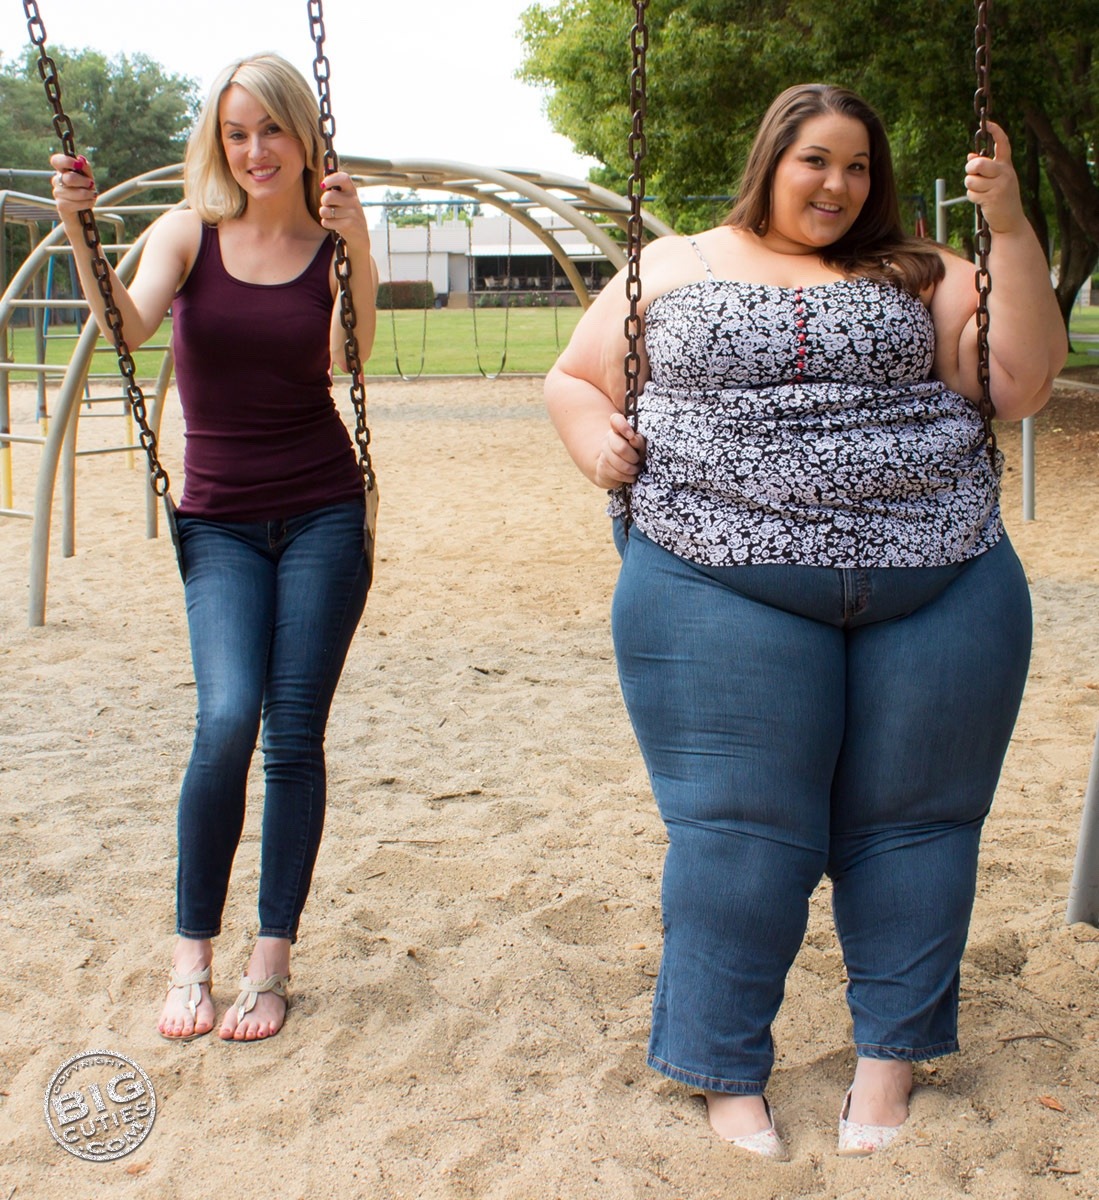 Feedee Bbw Before And After Telegraph